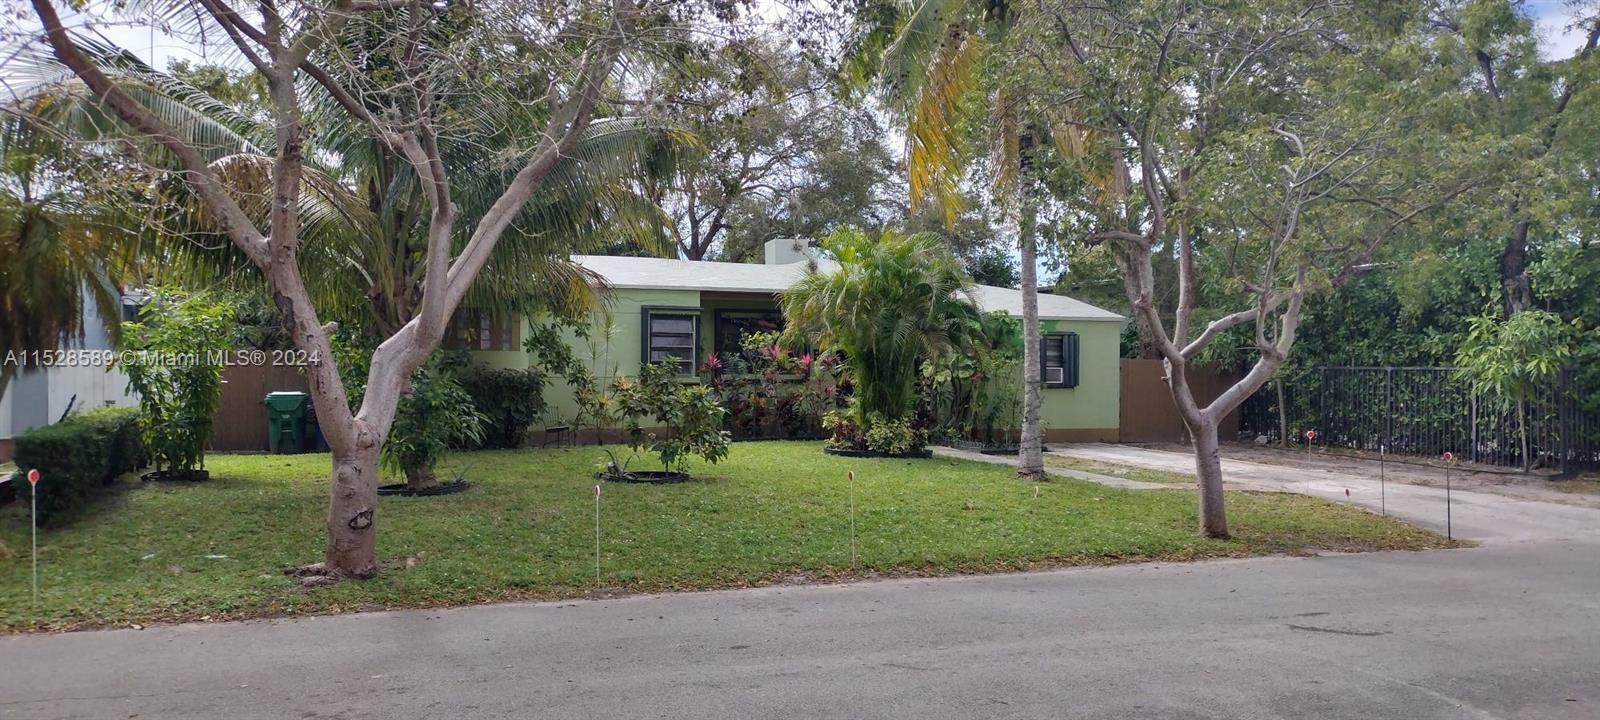 Welcome to this property located in a prime location close to the vibrant hot spots of the Miami Des